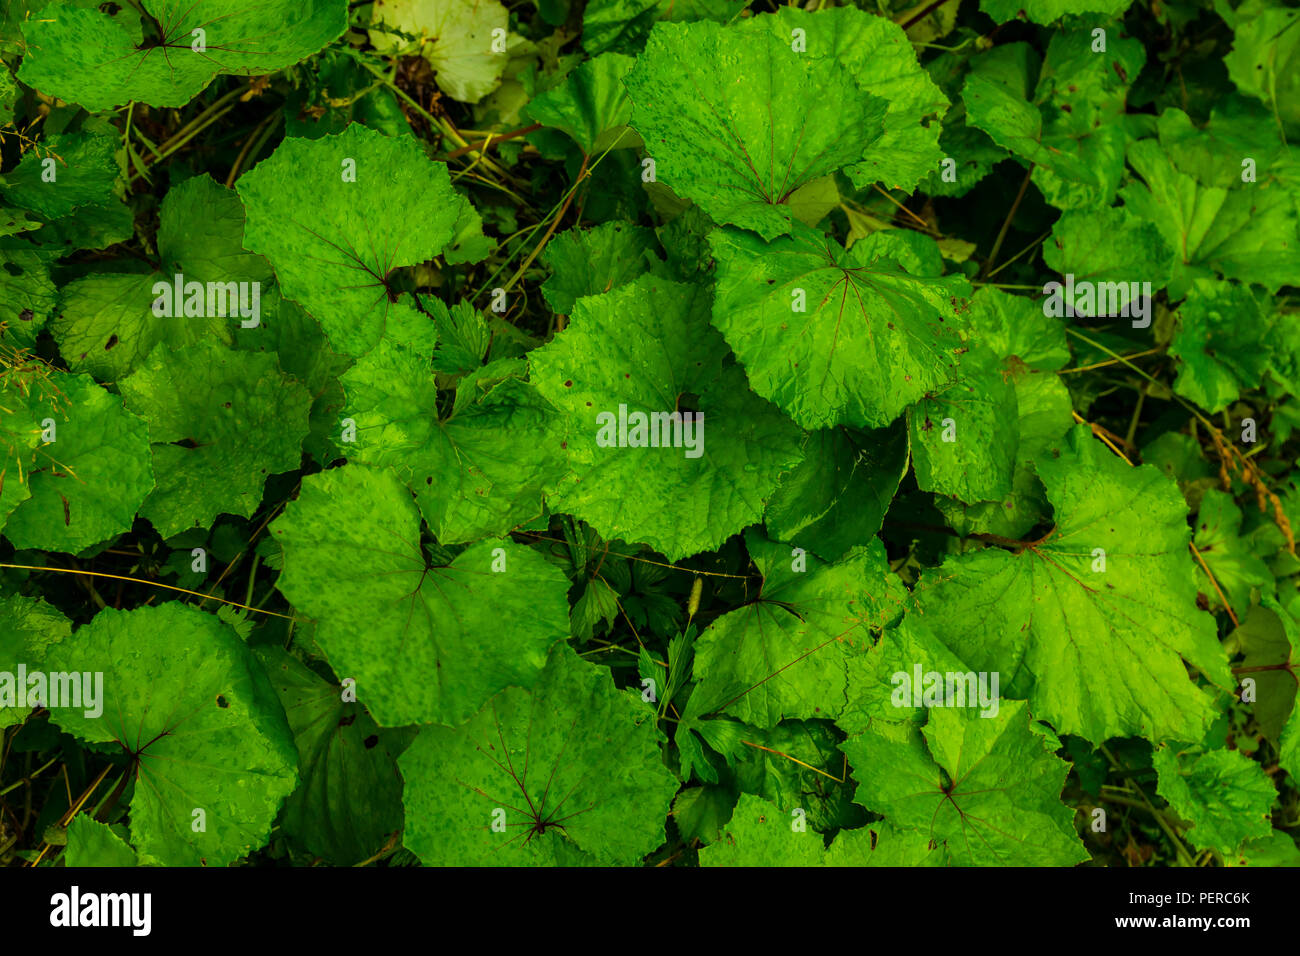 Begonia leaves pattern after rain Stock Photo